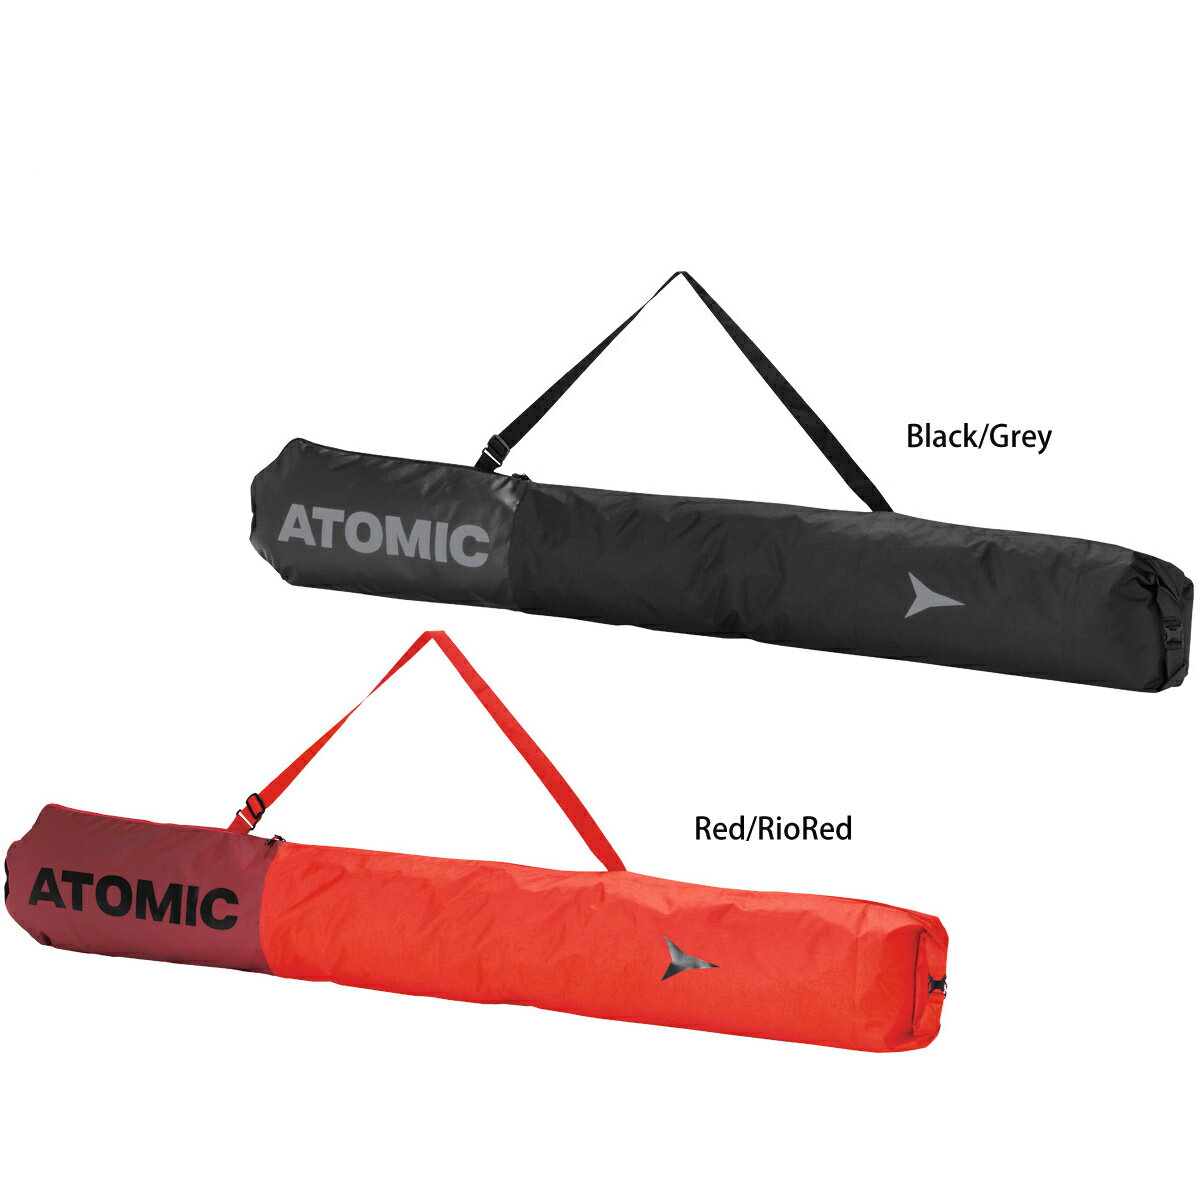 ATOMIC アトミック 1台用スキーケース・SKI SLEEVECOLOR・Black/grey・Red/rioredDIMENSIONS(HxLxW)max.205x34x2cmWEIGHT:550gFABRIC・500D Poly with PU Coating・600D Poly with Neo Coating・PVC freeCONSTRUCTION・簡単にアクセスできるジッパー式サイドオープニング・調節可能なショルダーストラップ・ロールトップ:調節可能な長さ、長さ調節FEATURES耐水性と防汚性のある表地made in VIETNAM